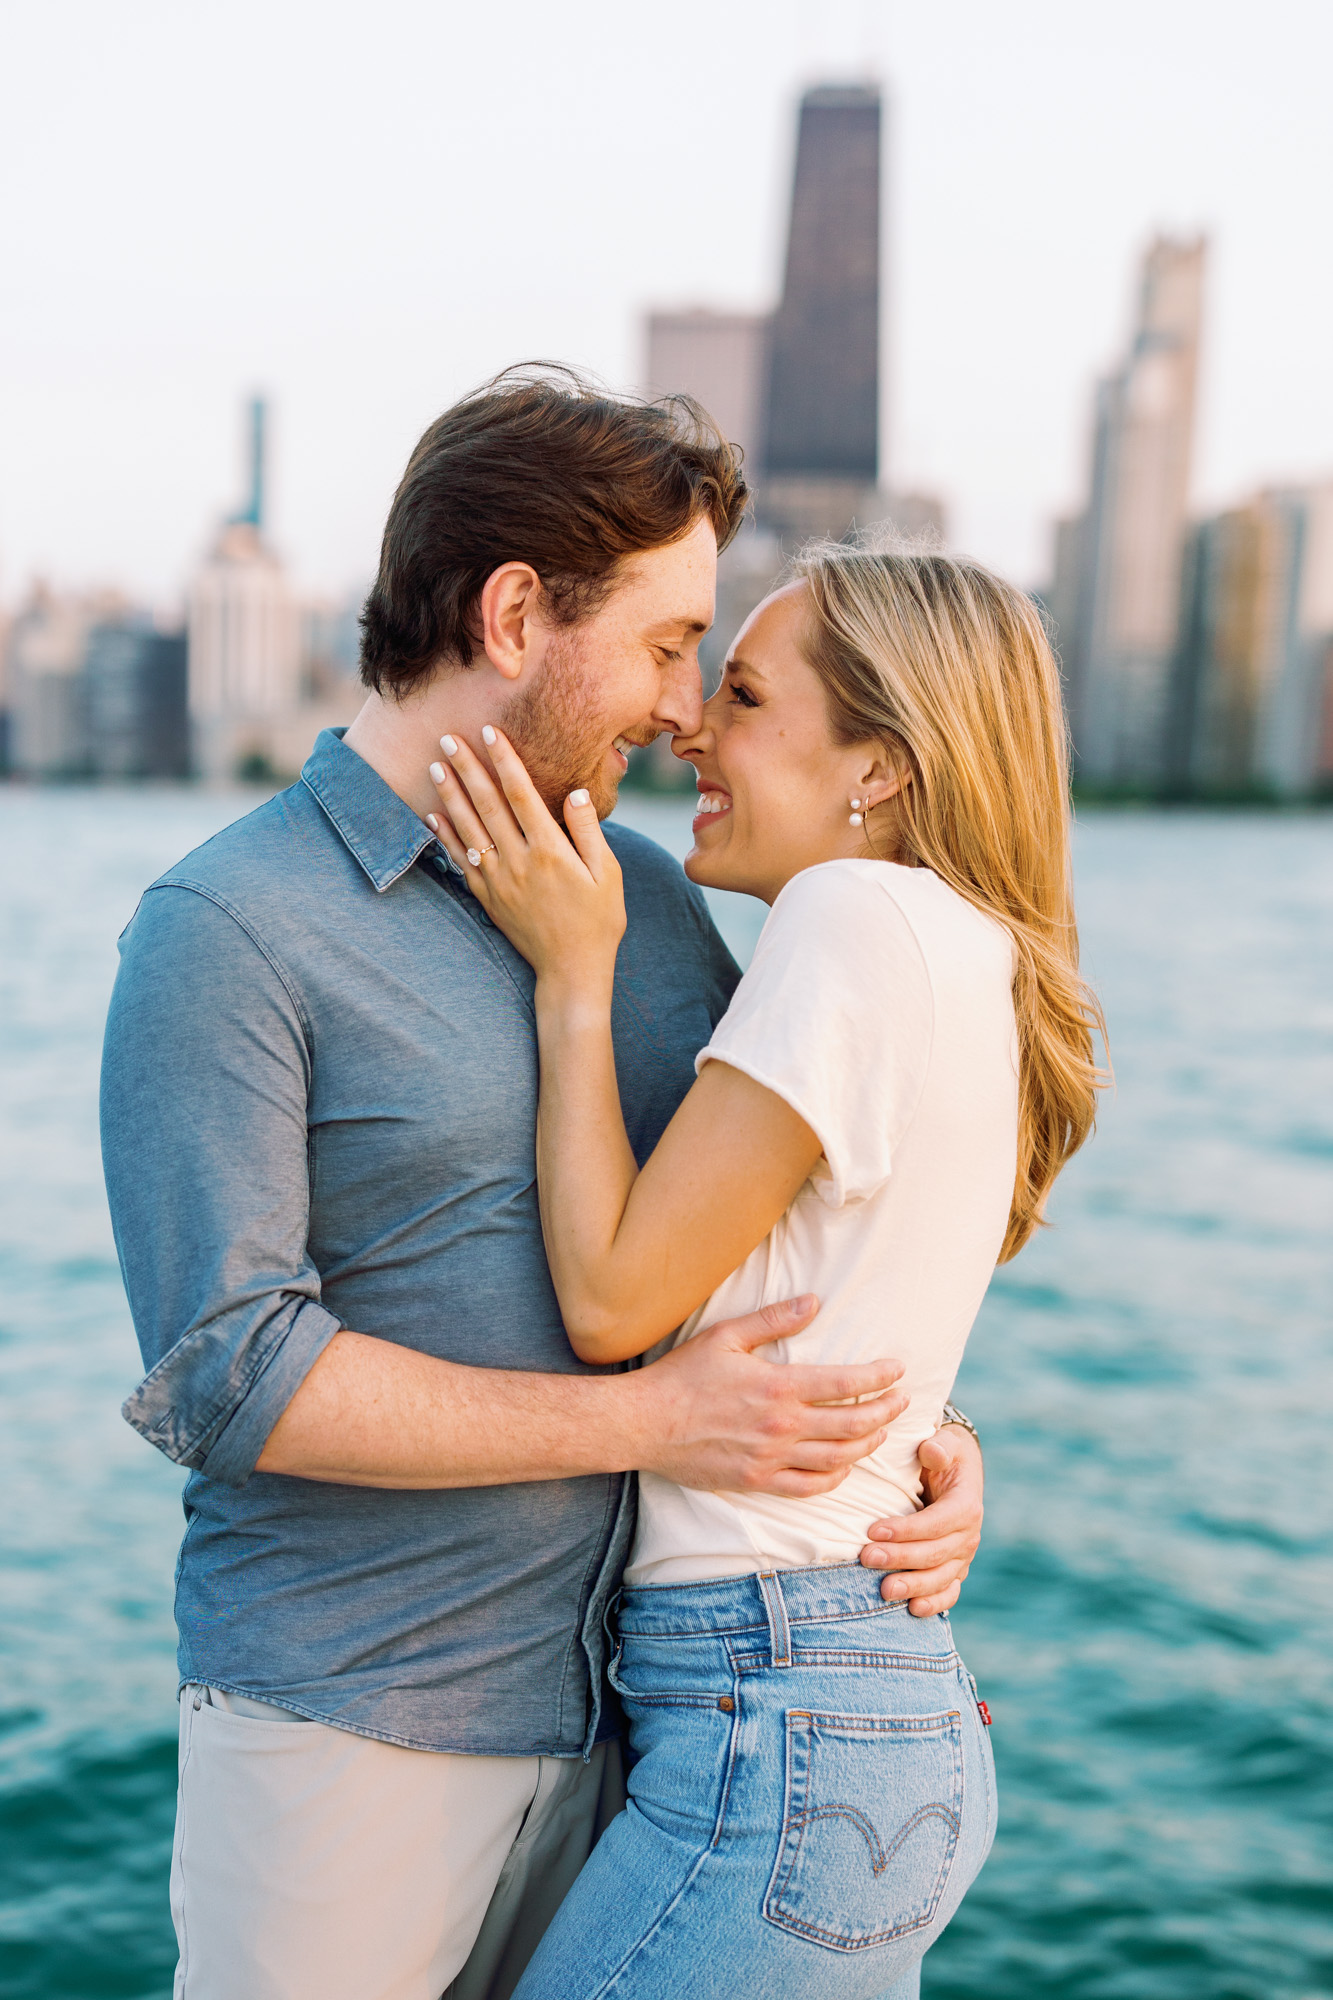 A Chicago engagement photo.